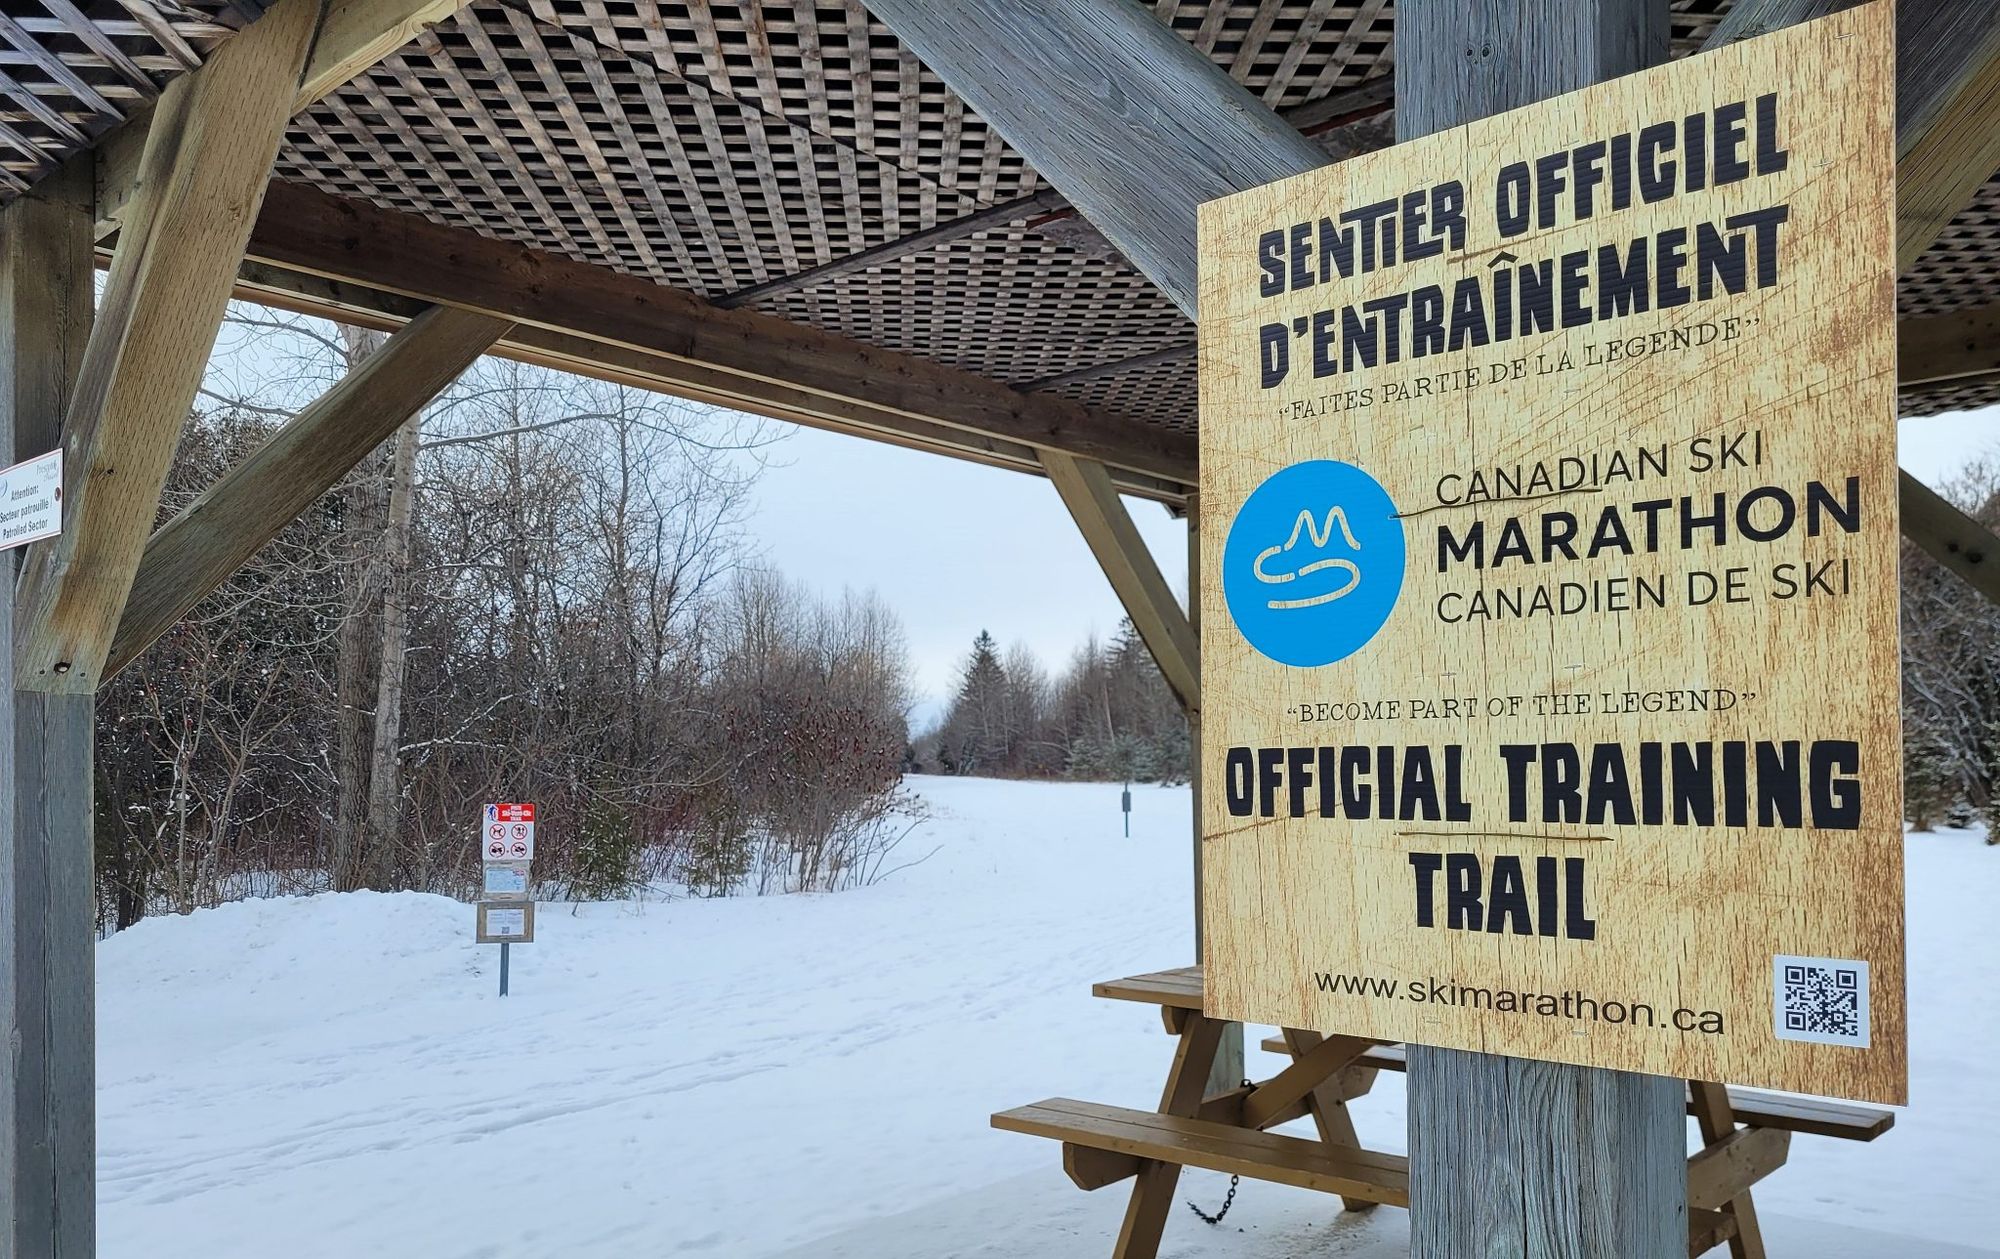 Snowstorm a boon to cross-country skiers, as trails open